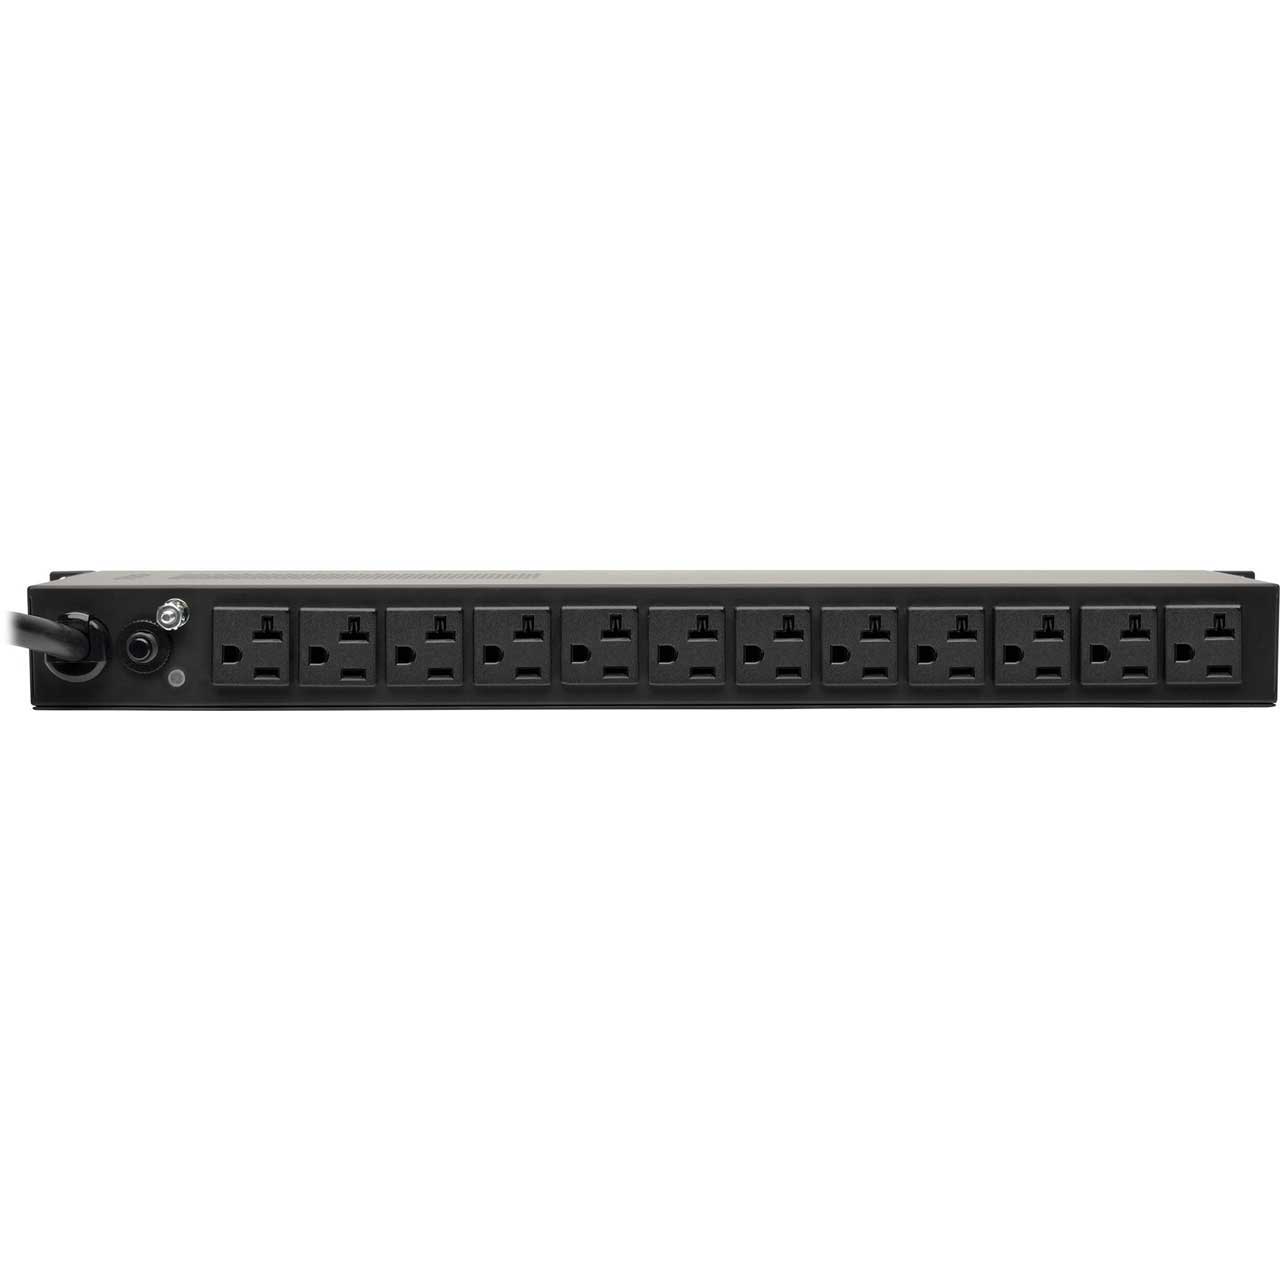 14 Outlets 5-20P Adapter 15 ft Tripp Lite PDU 1.92kW 3840 Joules 120V Cord L5-20P Input 1U PDUH20-ISO Single-Phase Basic PDU with Isobar Surge Protection 